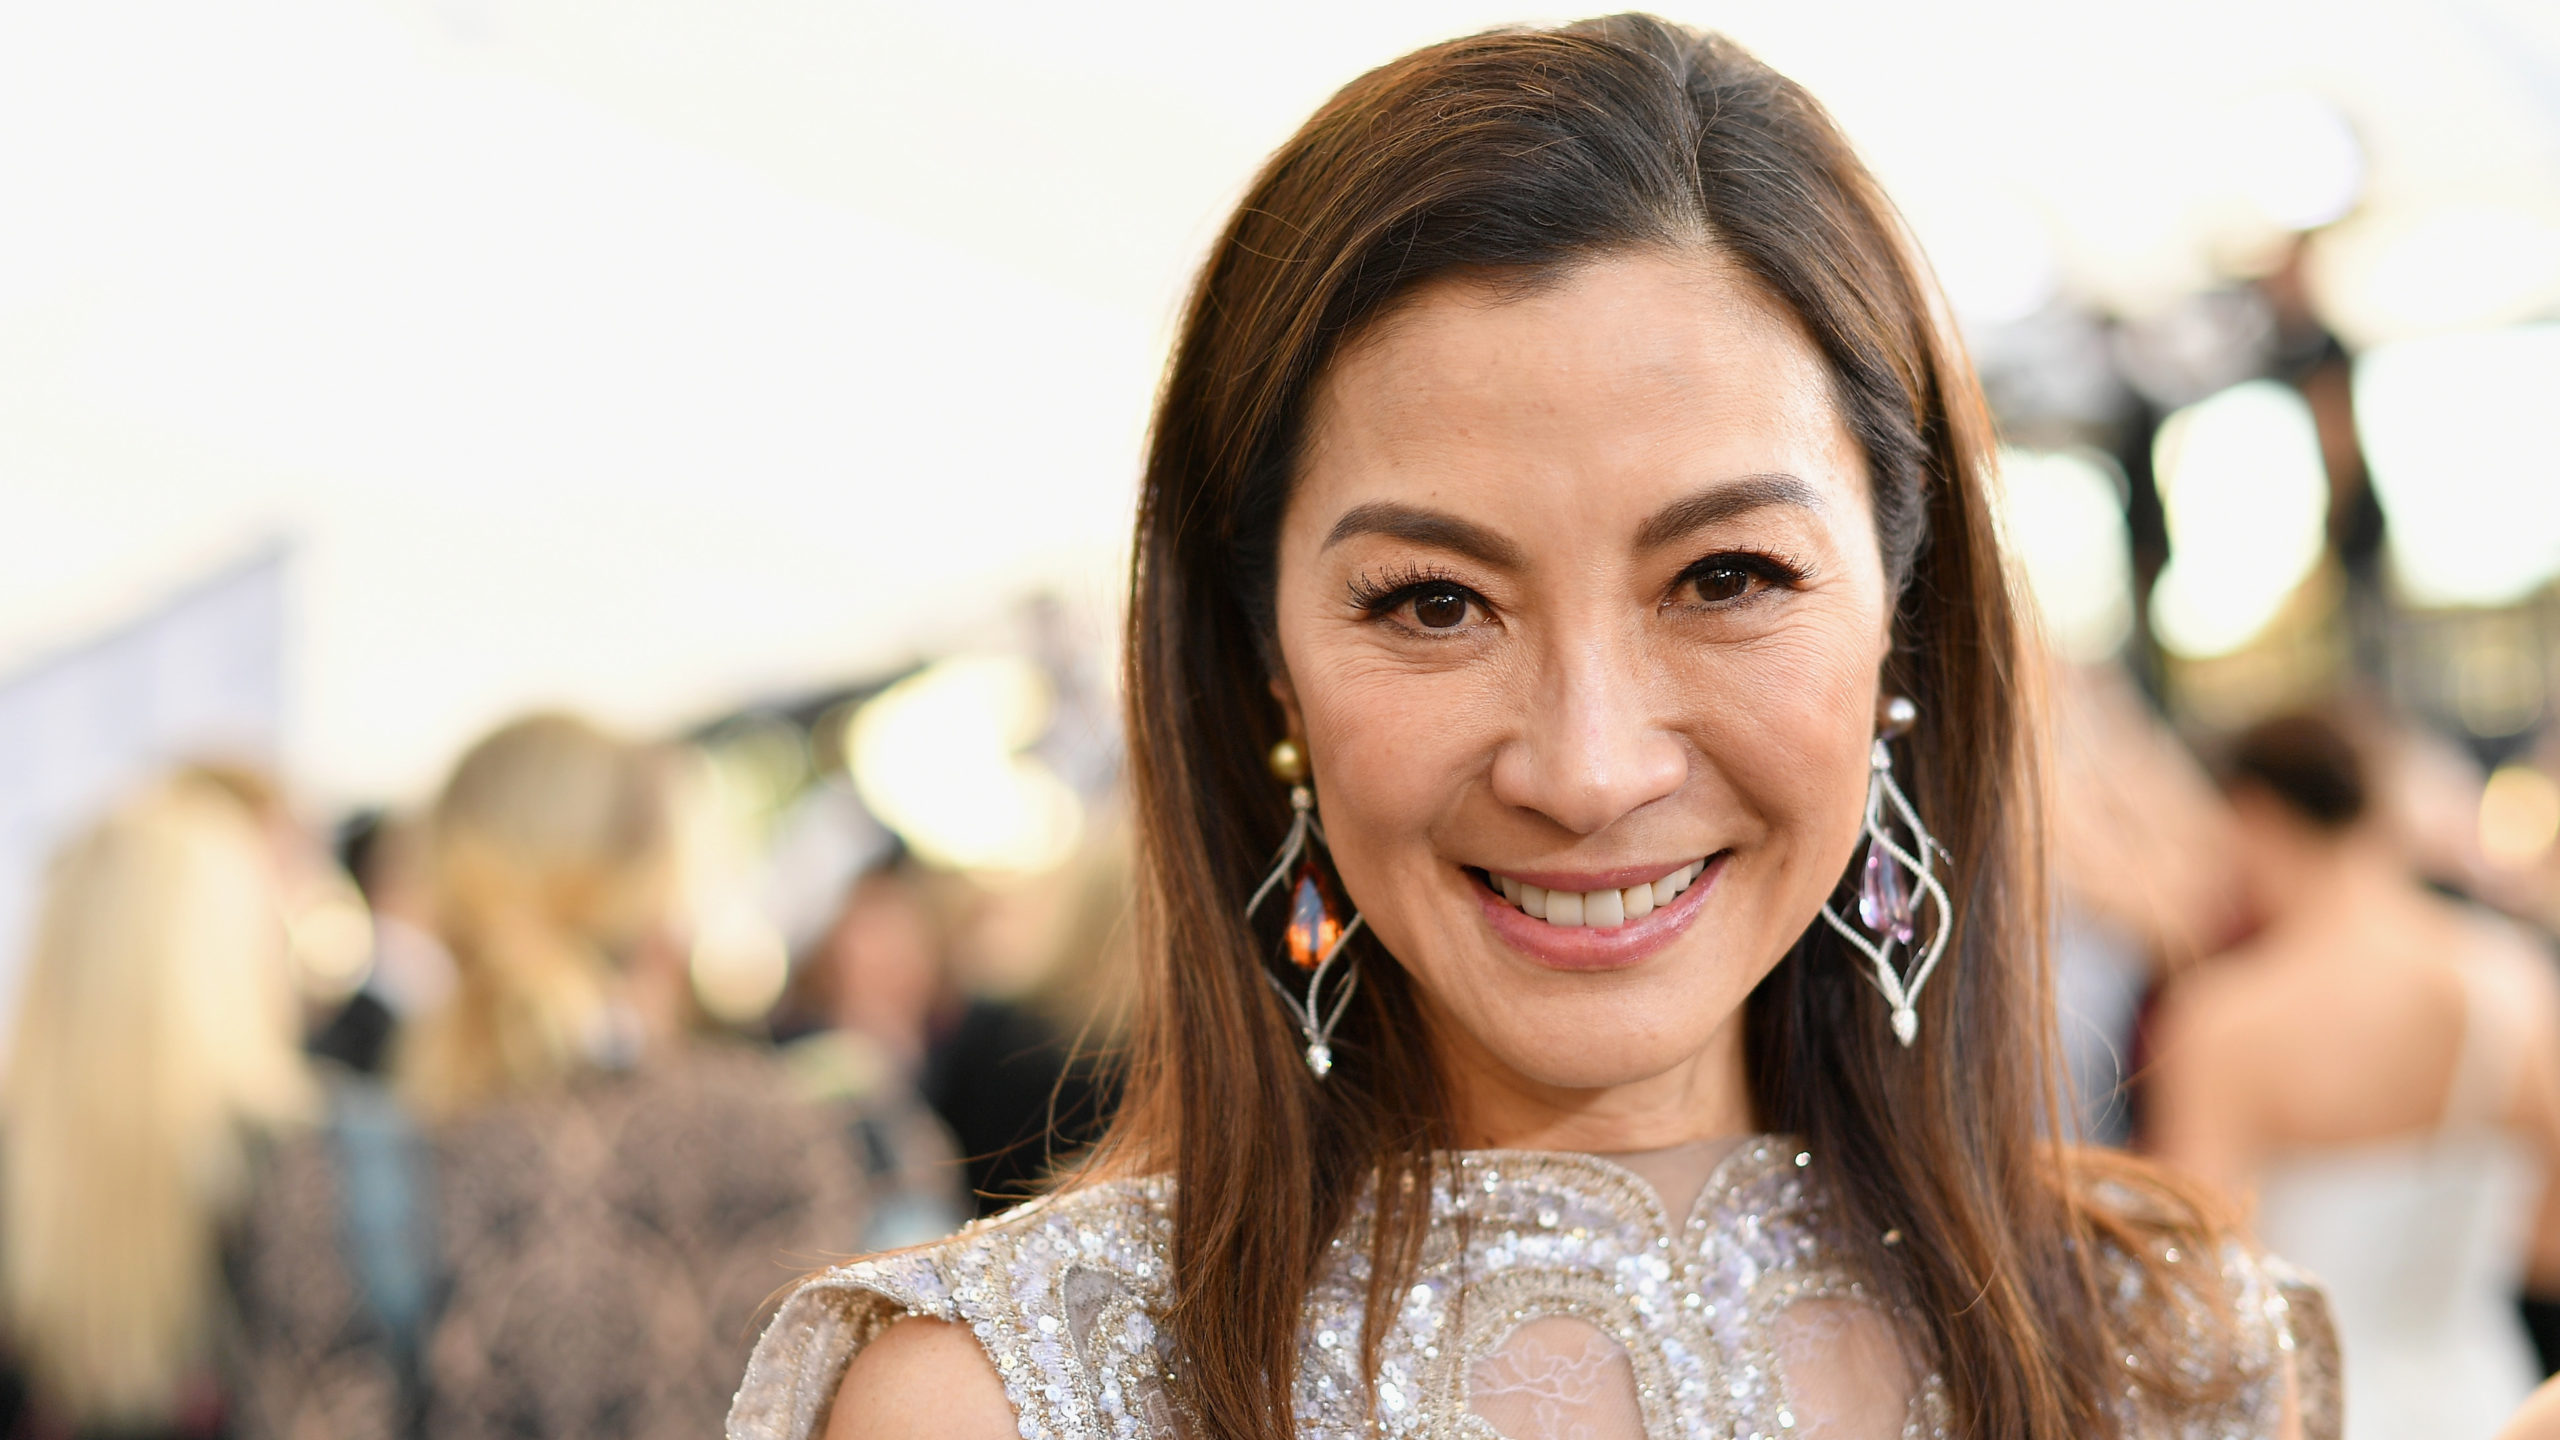 Happy Birthday Michelle Yeoh: Upcoming Movies of the Legendary 'Tomorrow Never Dies' Actress